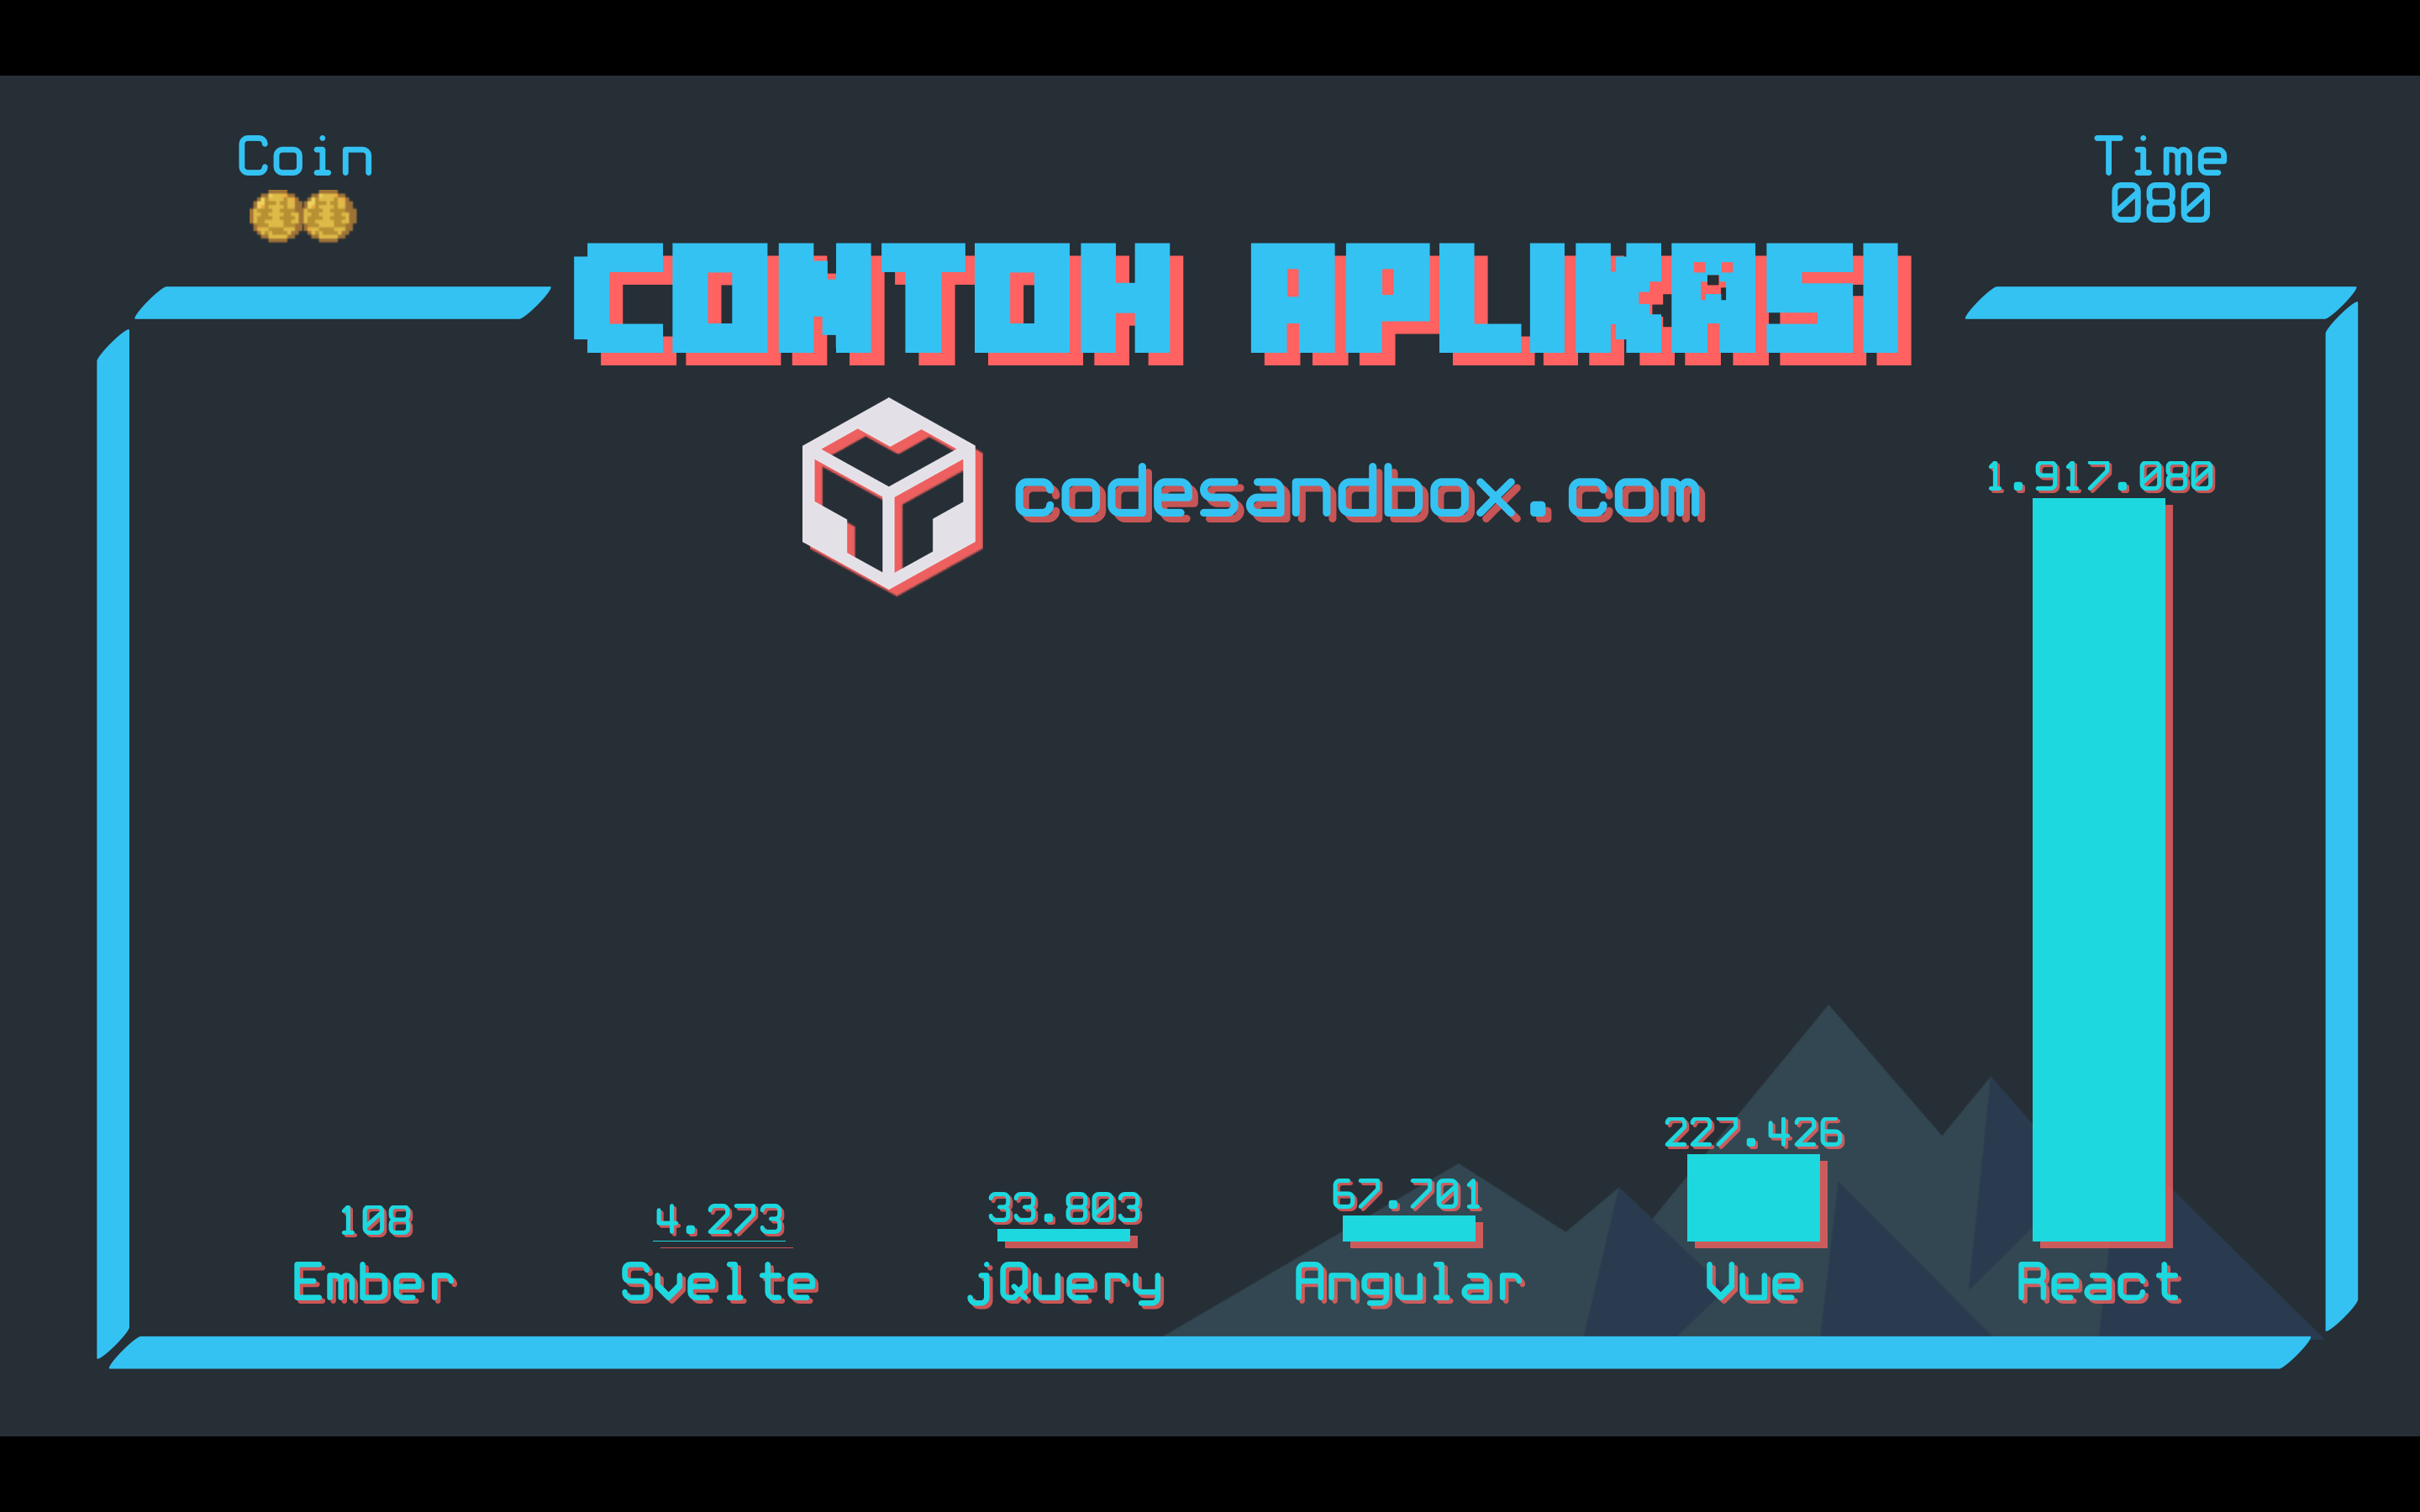 The total of available sample applications at codesandbox